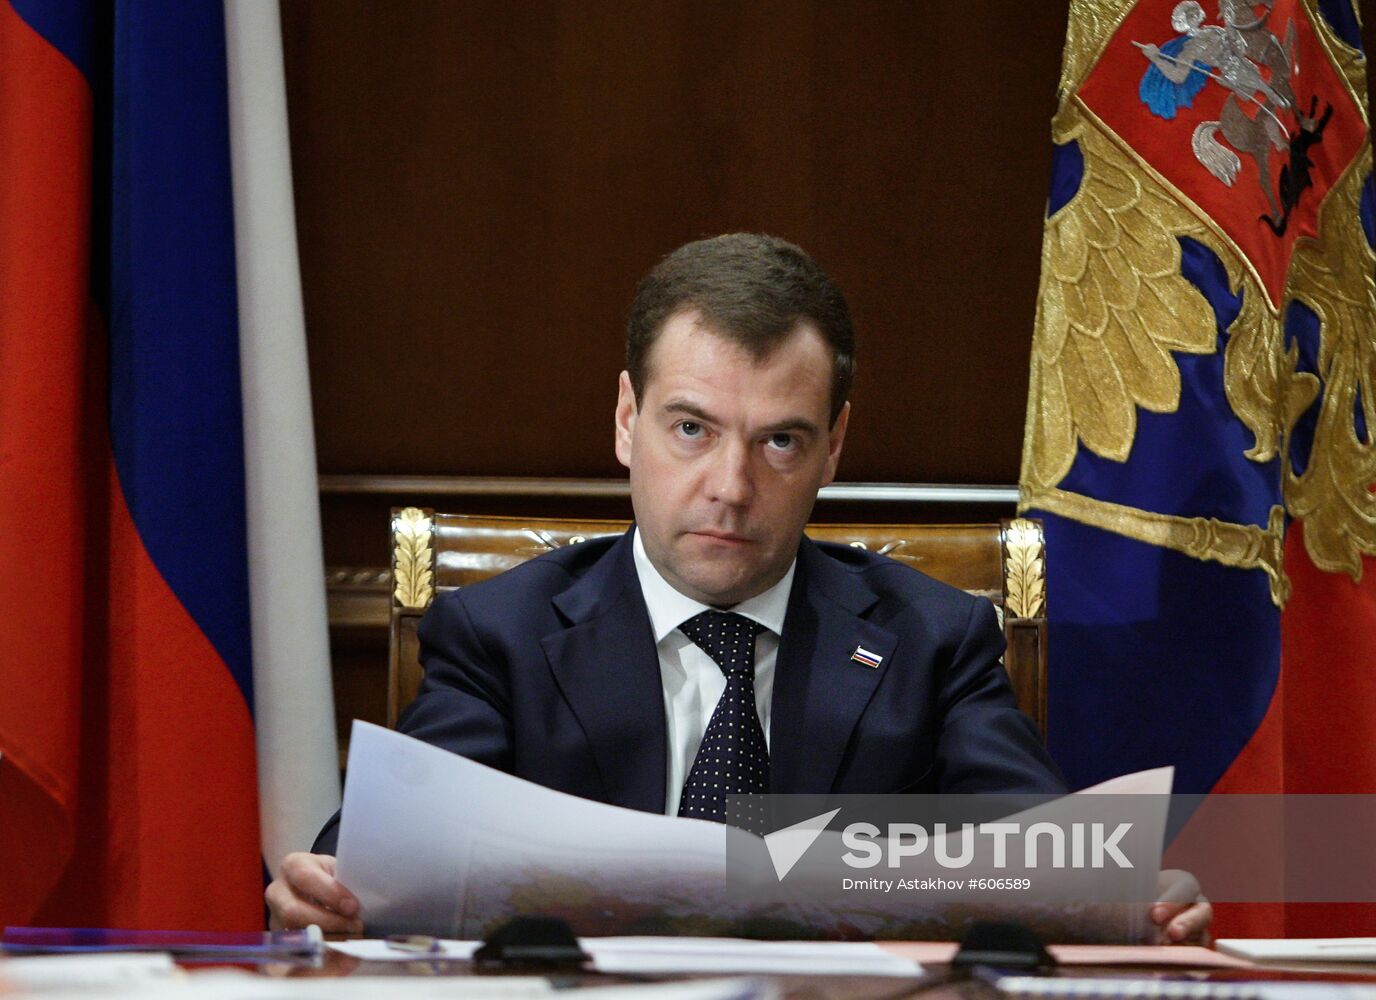 Dmitry Medvedev chairs meeting on time zones